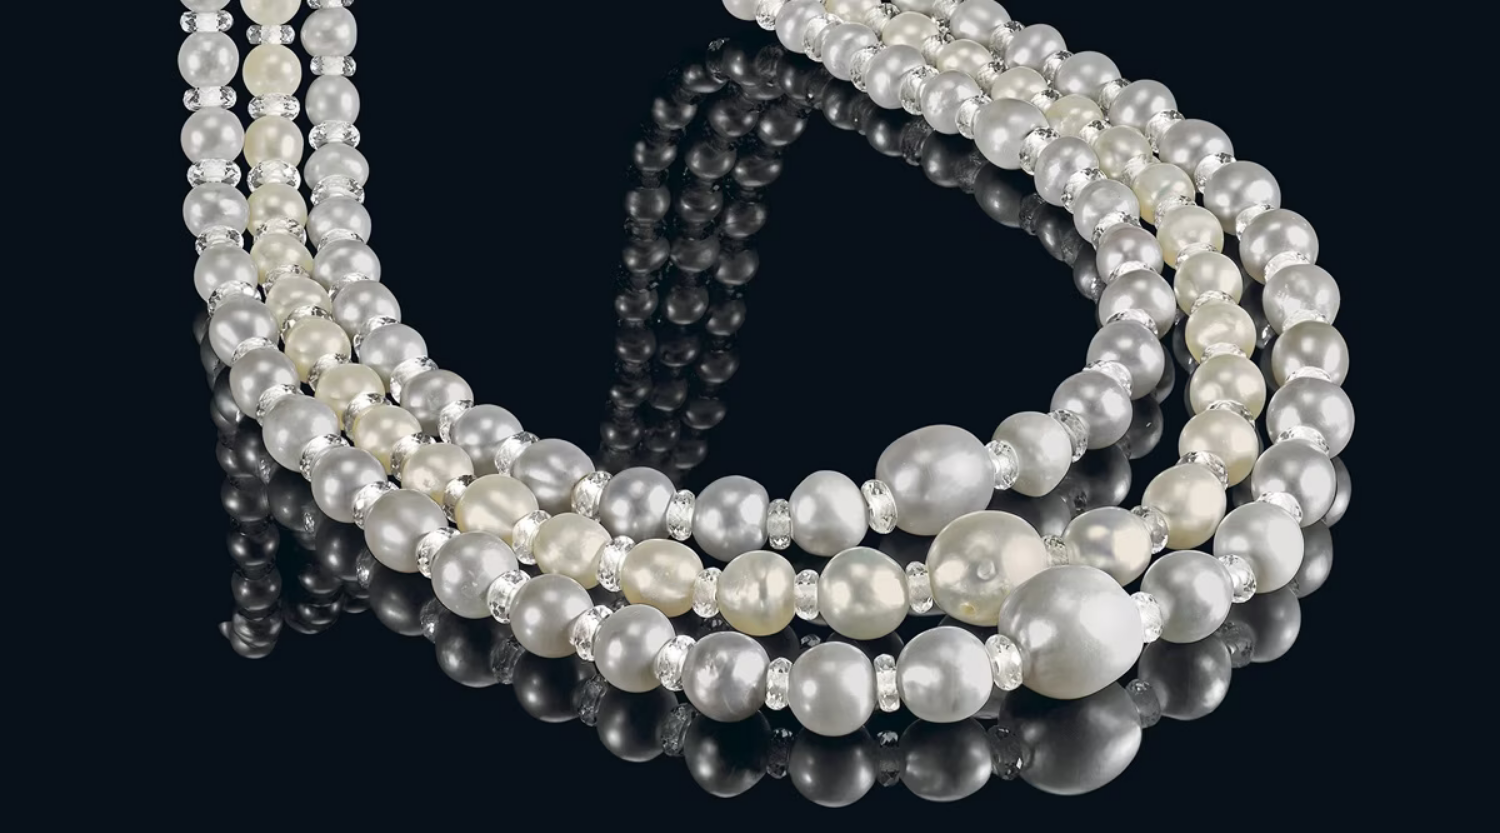 Rare, natural pearl necklace at online auction sells for over 6 crores